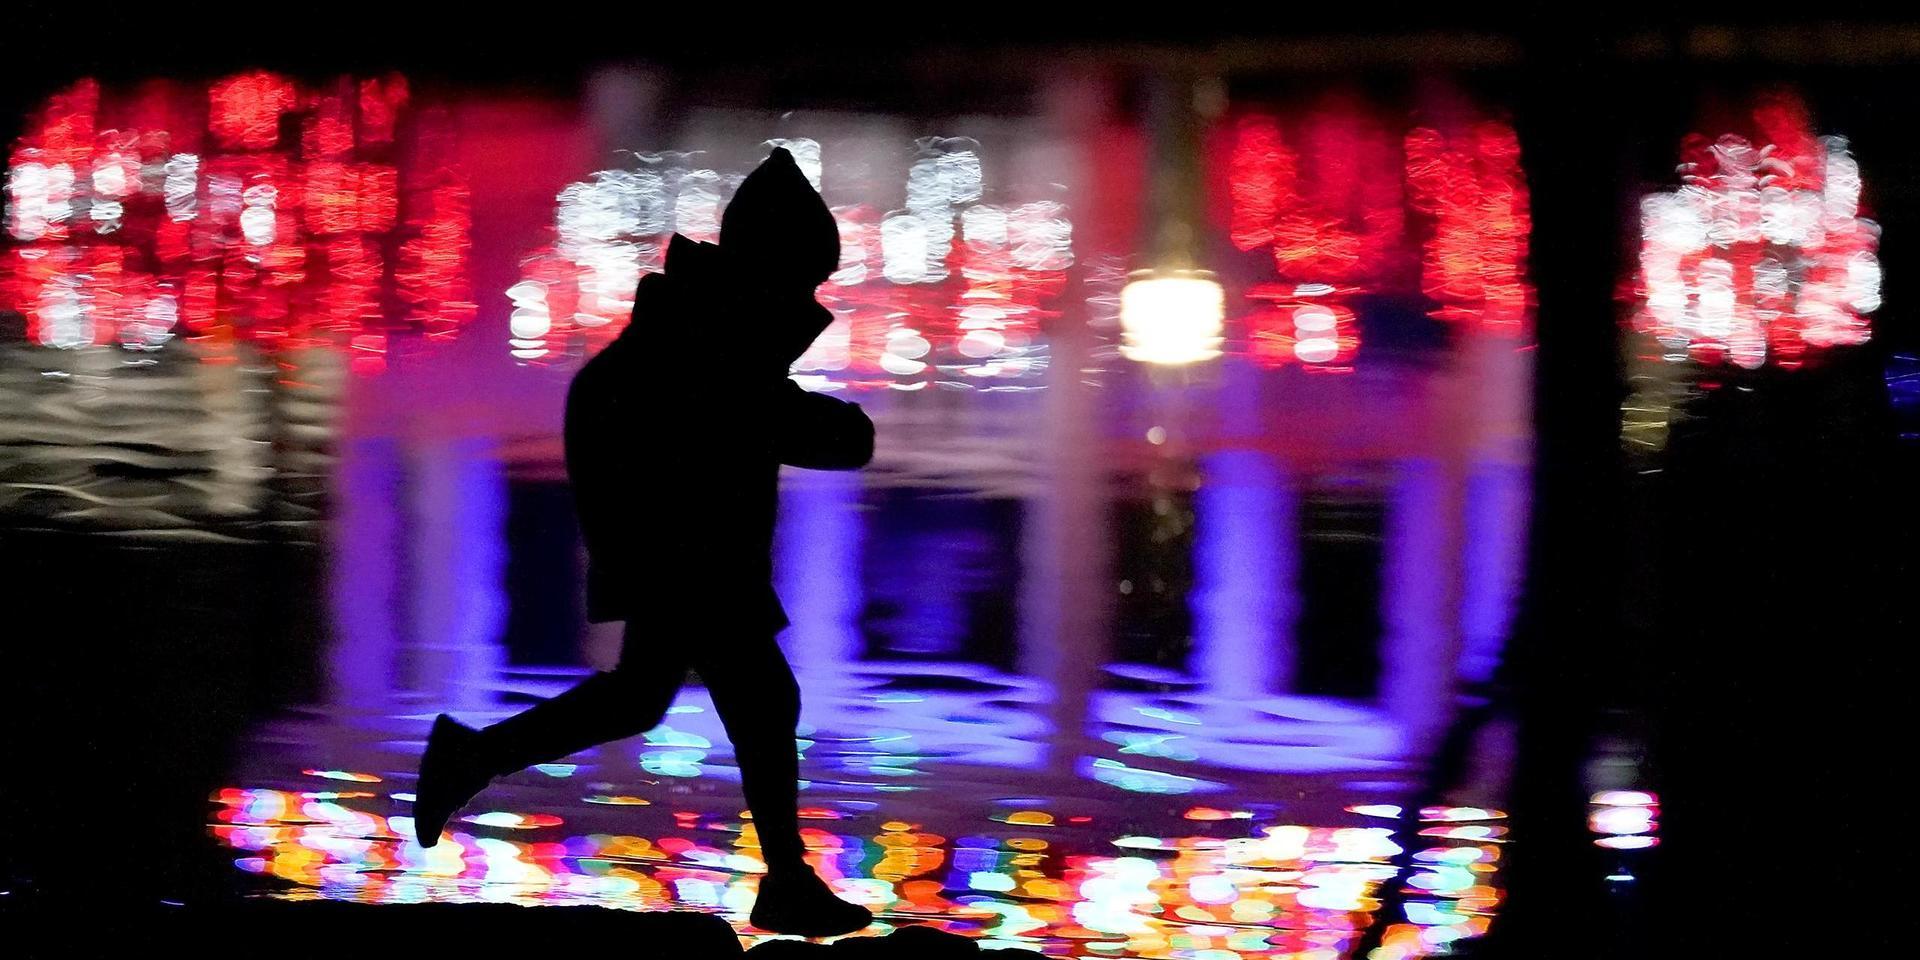 A child is silhouetted against Christmas lights reflected on a pond at a park in Lenexa, Kan., Friday, Dec. 4, 2020. (AP Photo/Charlie Riedel)